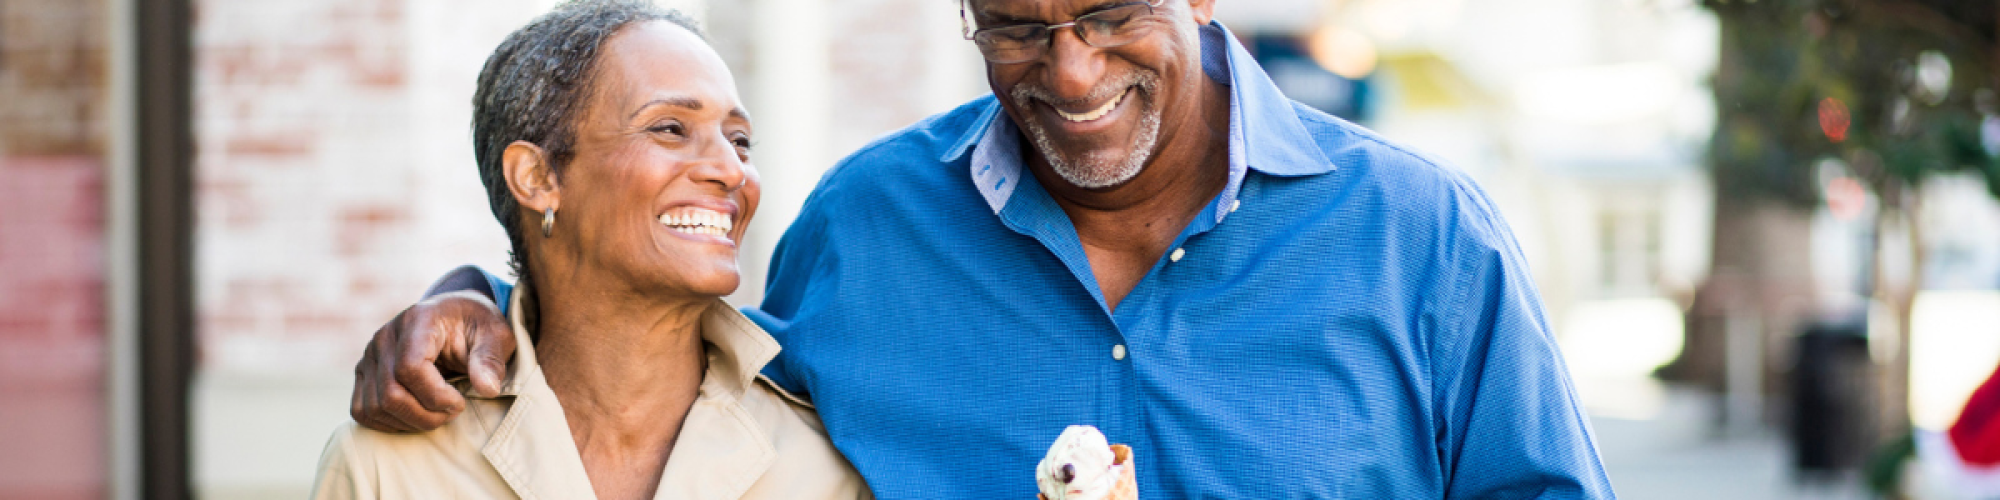 An older couple smiles and walks arm in arm while enjoying ice cream cones on a sunny day in a charming outdoor setting.